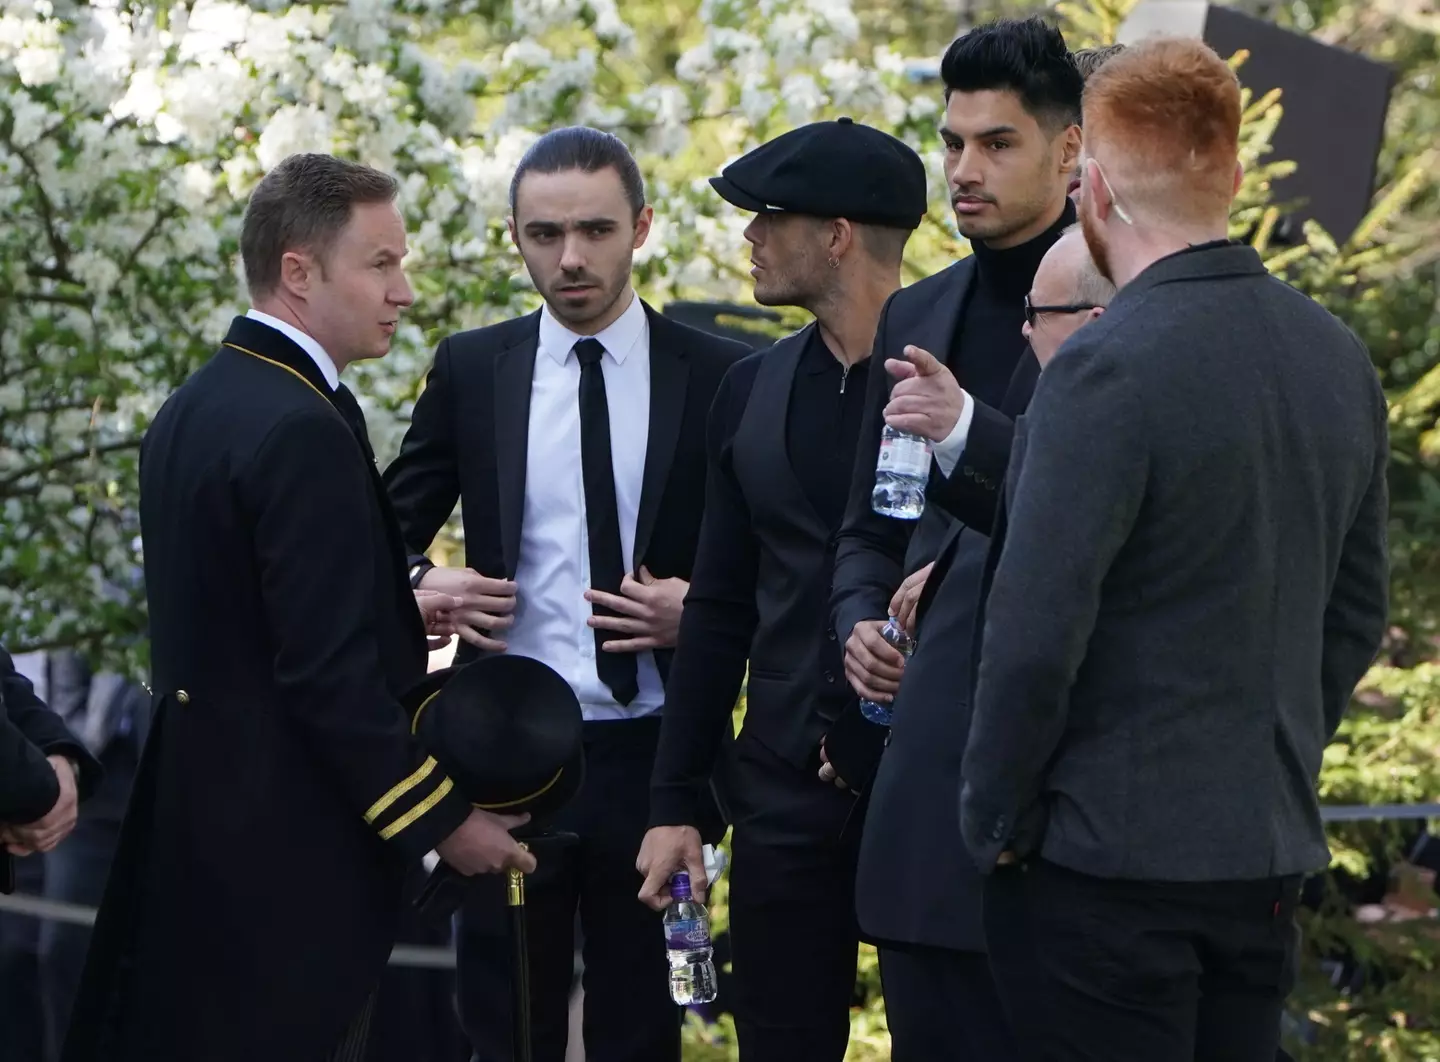 The members of The Wanted Nathan Sykes (second left), Max George (centre) and Siva Kaneswaran (third right) arrive for the funeral of The Wanted star Tom Parker (